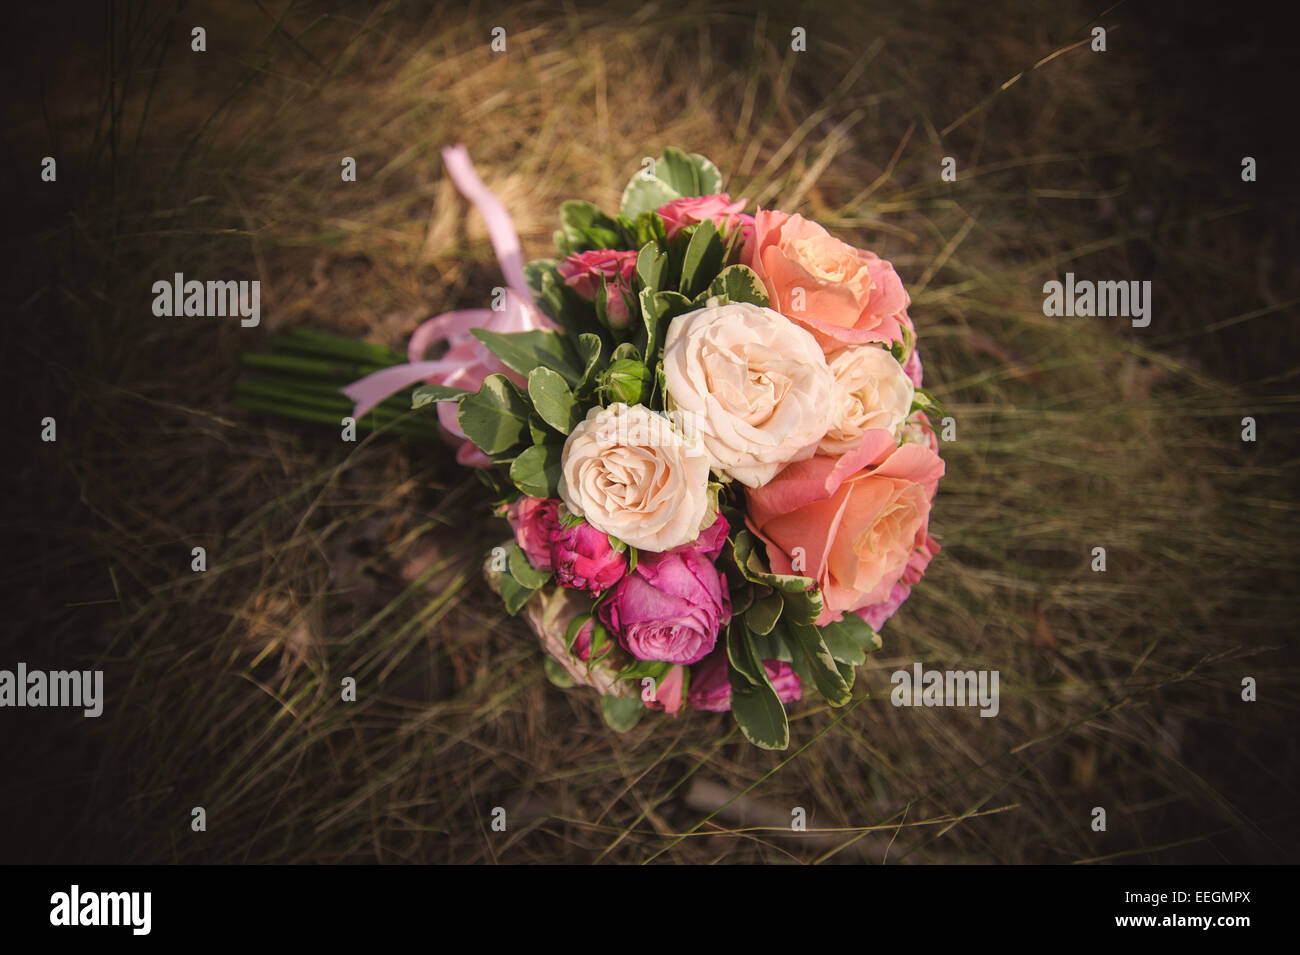 wedding bouquet from different rose color roses Stock Photo